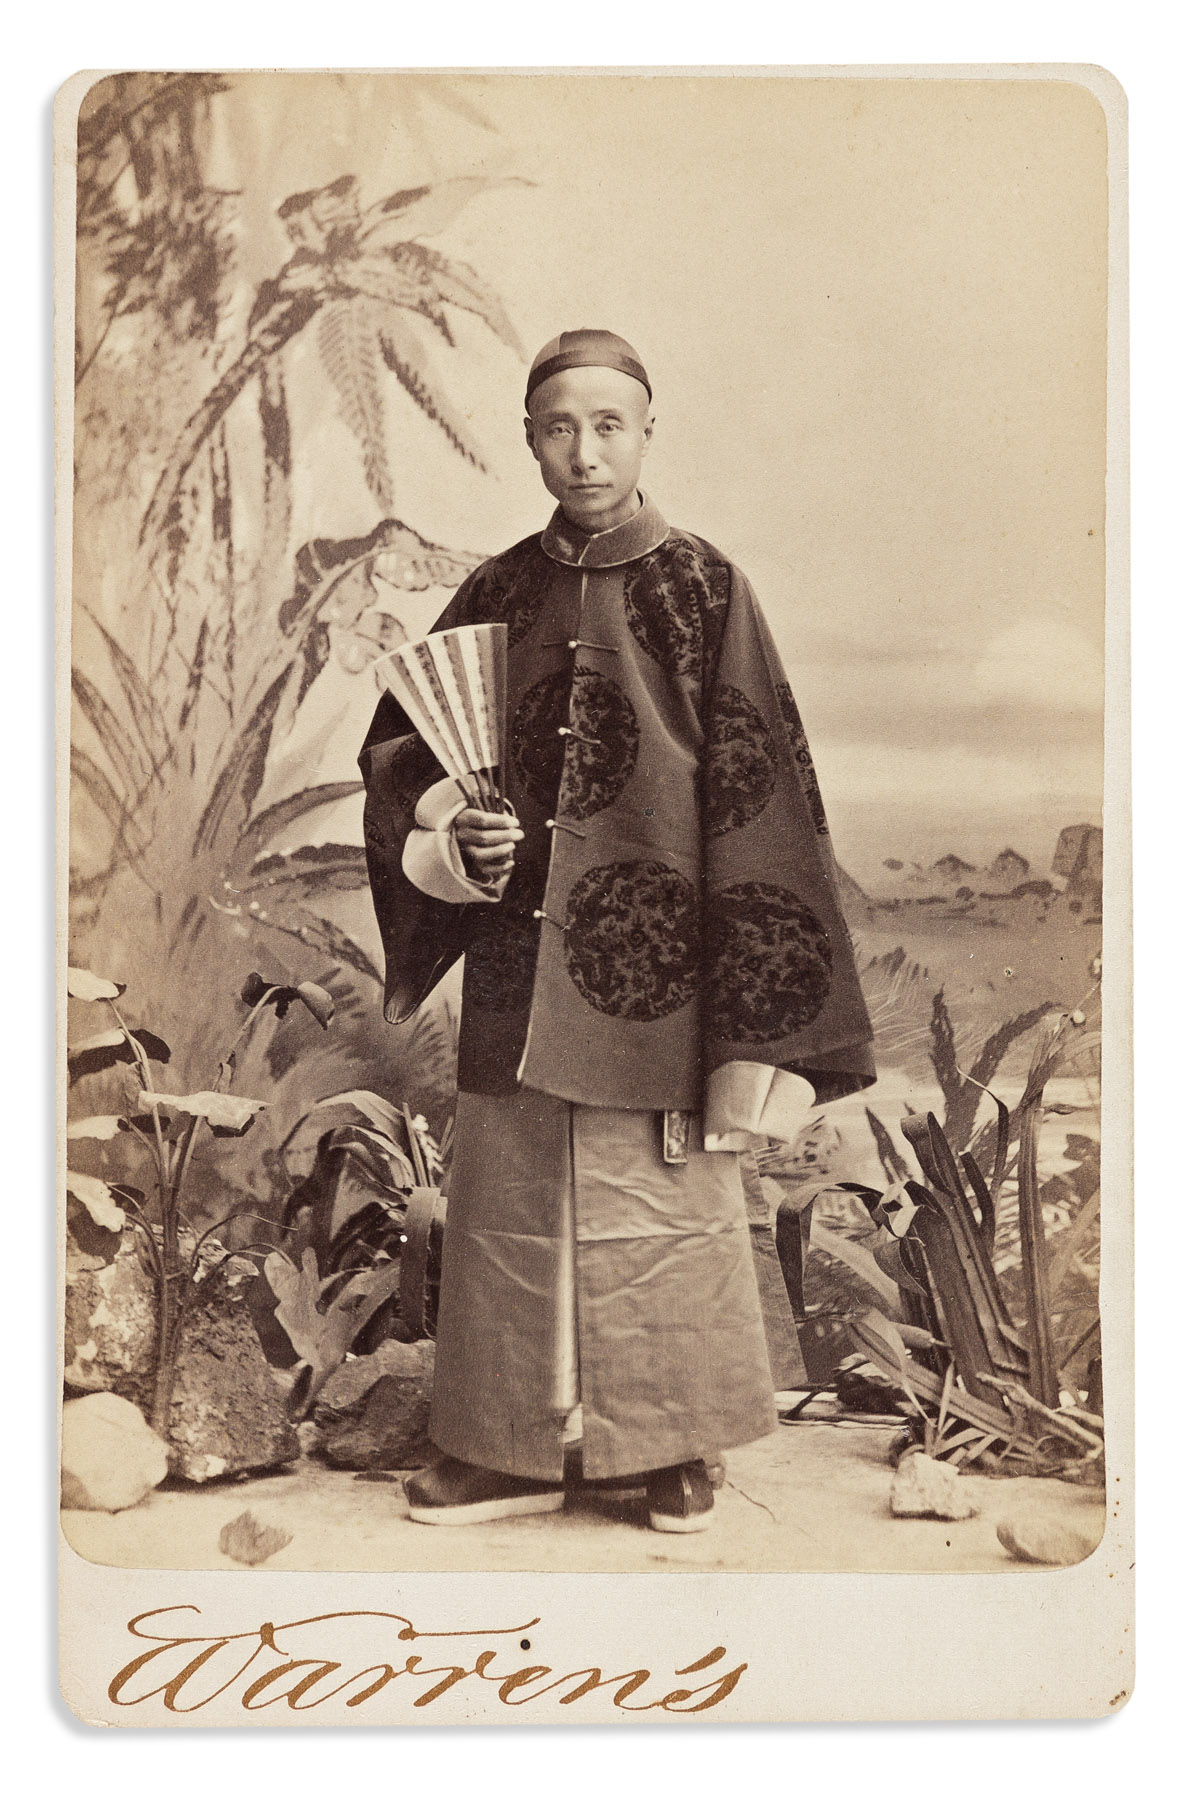 (CHINESE-AMERICANS.) Cabinet card of Ko Kun-hua, Harvards first professor of Chinese language.